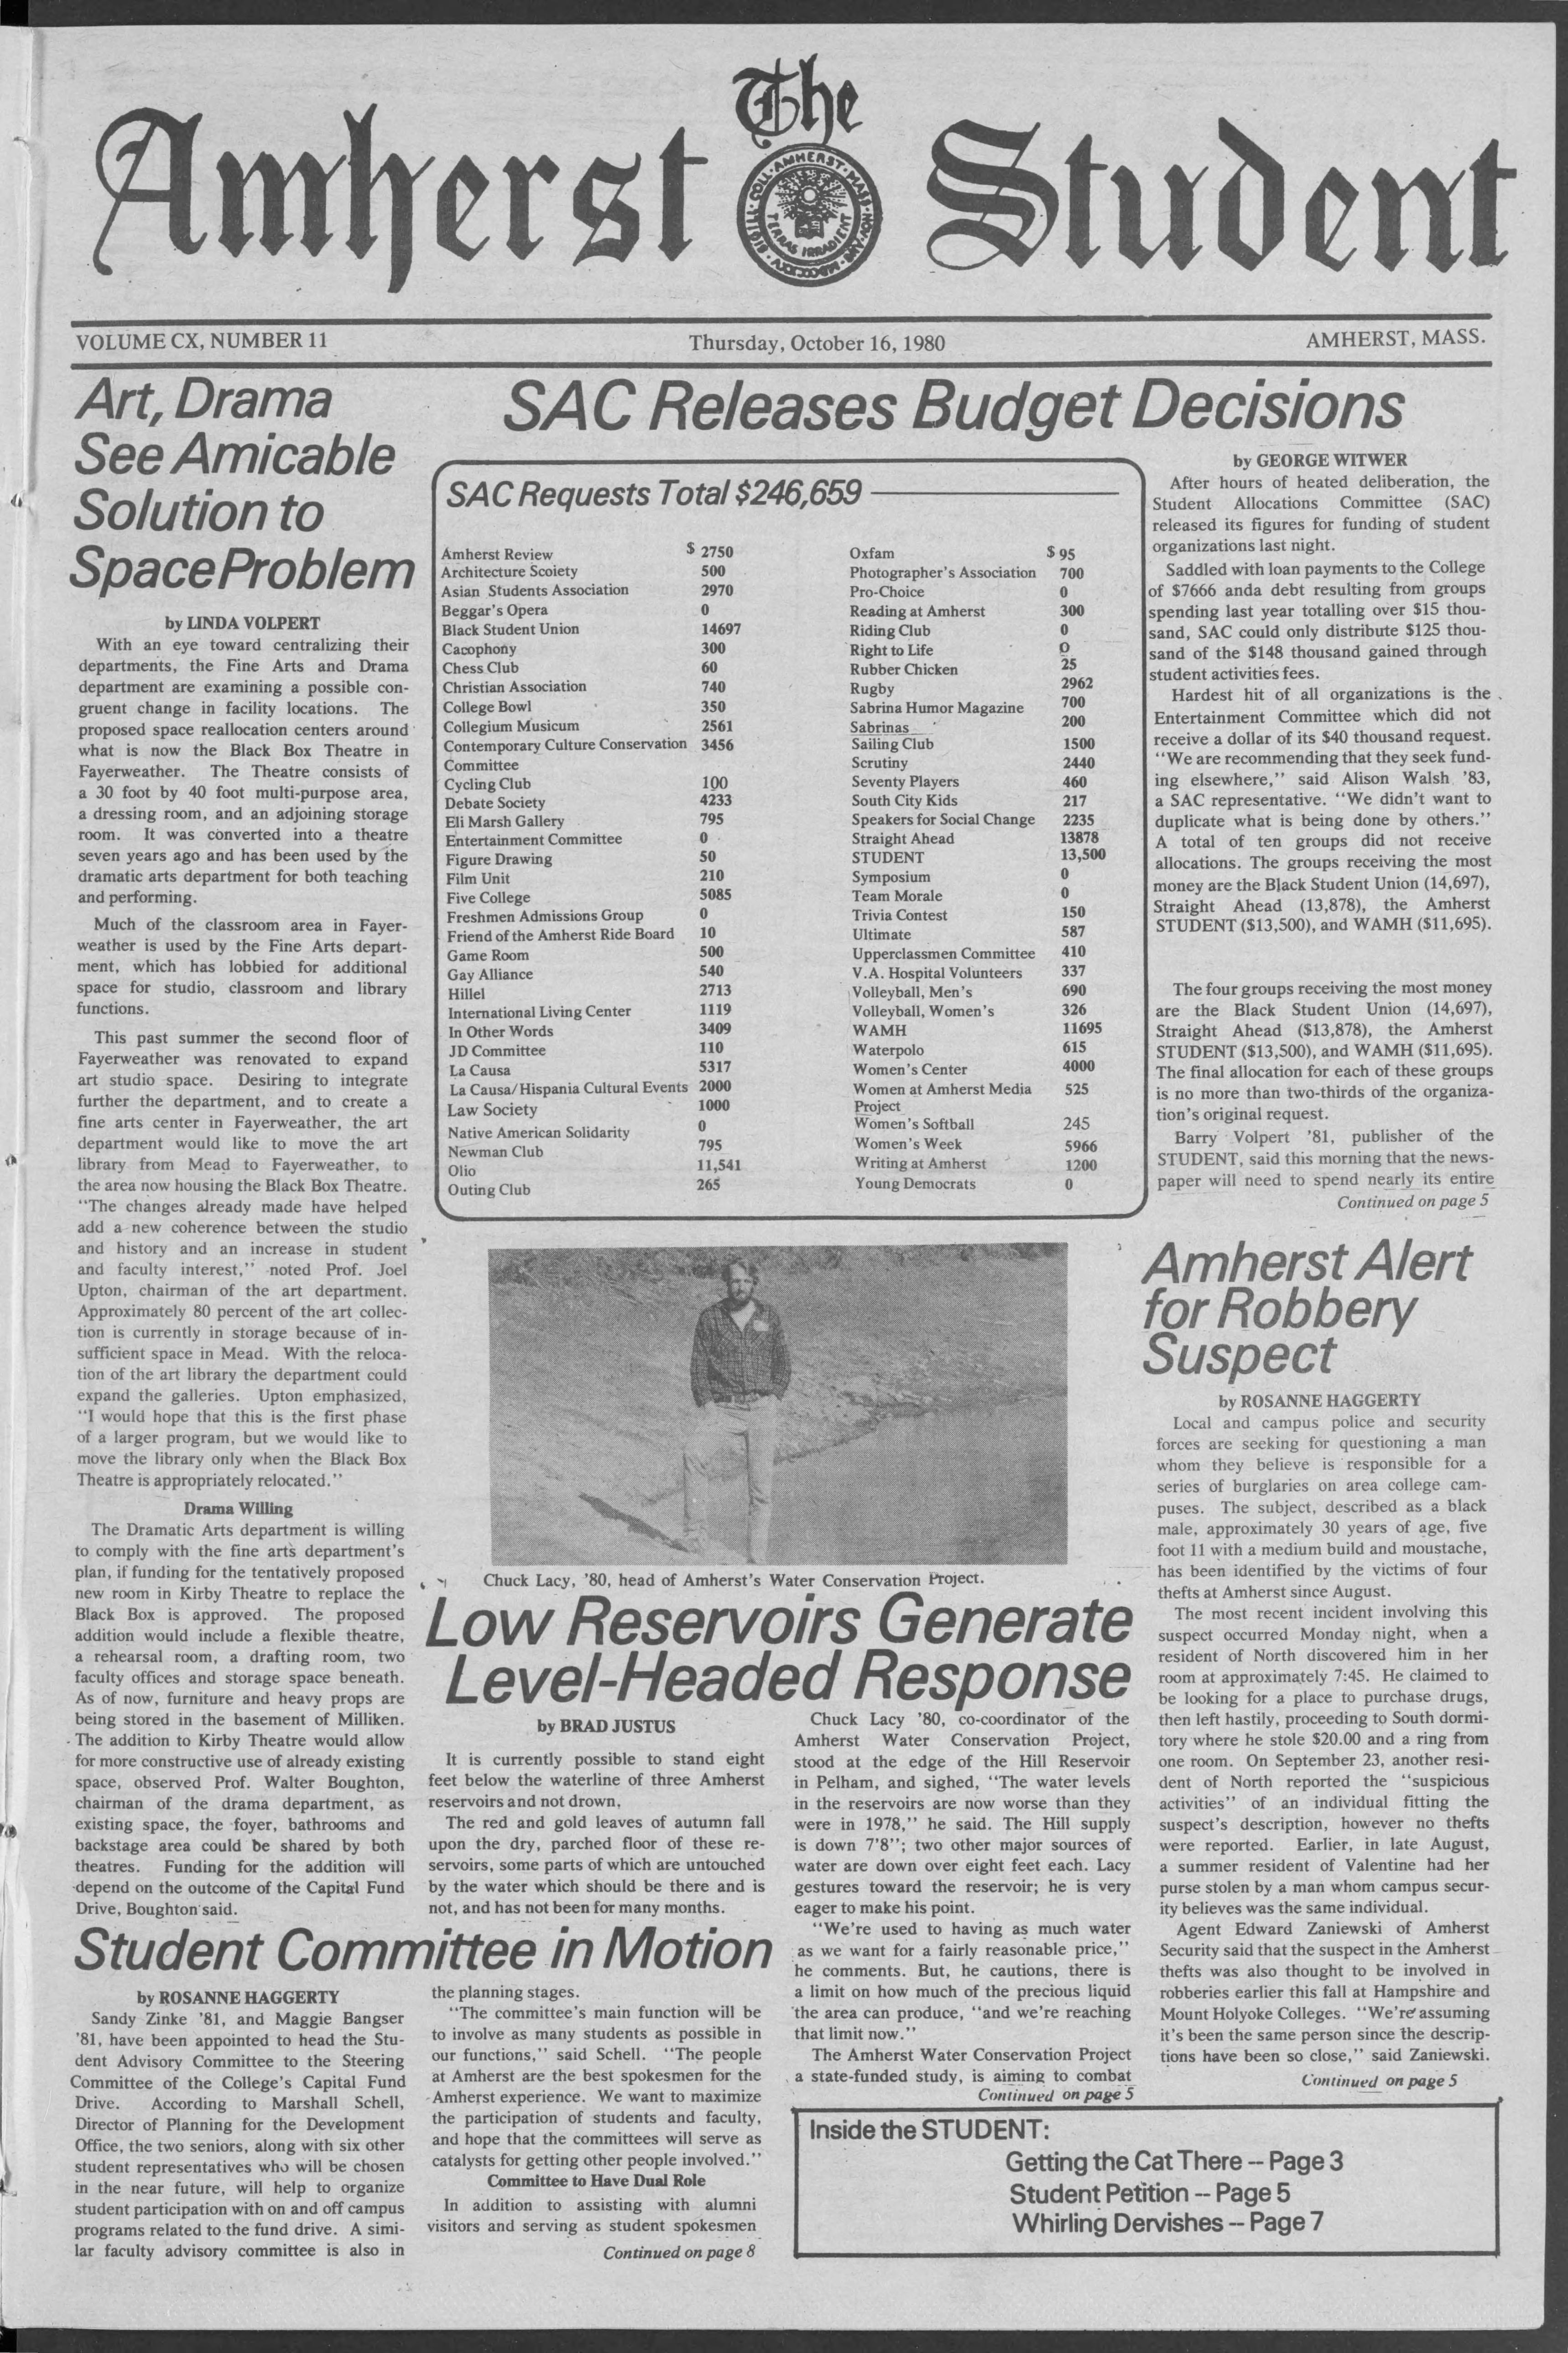 The Amherst Student, Oct. 16, 1980